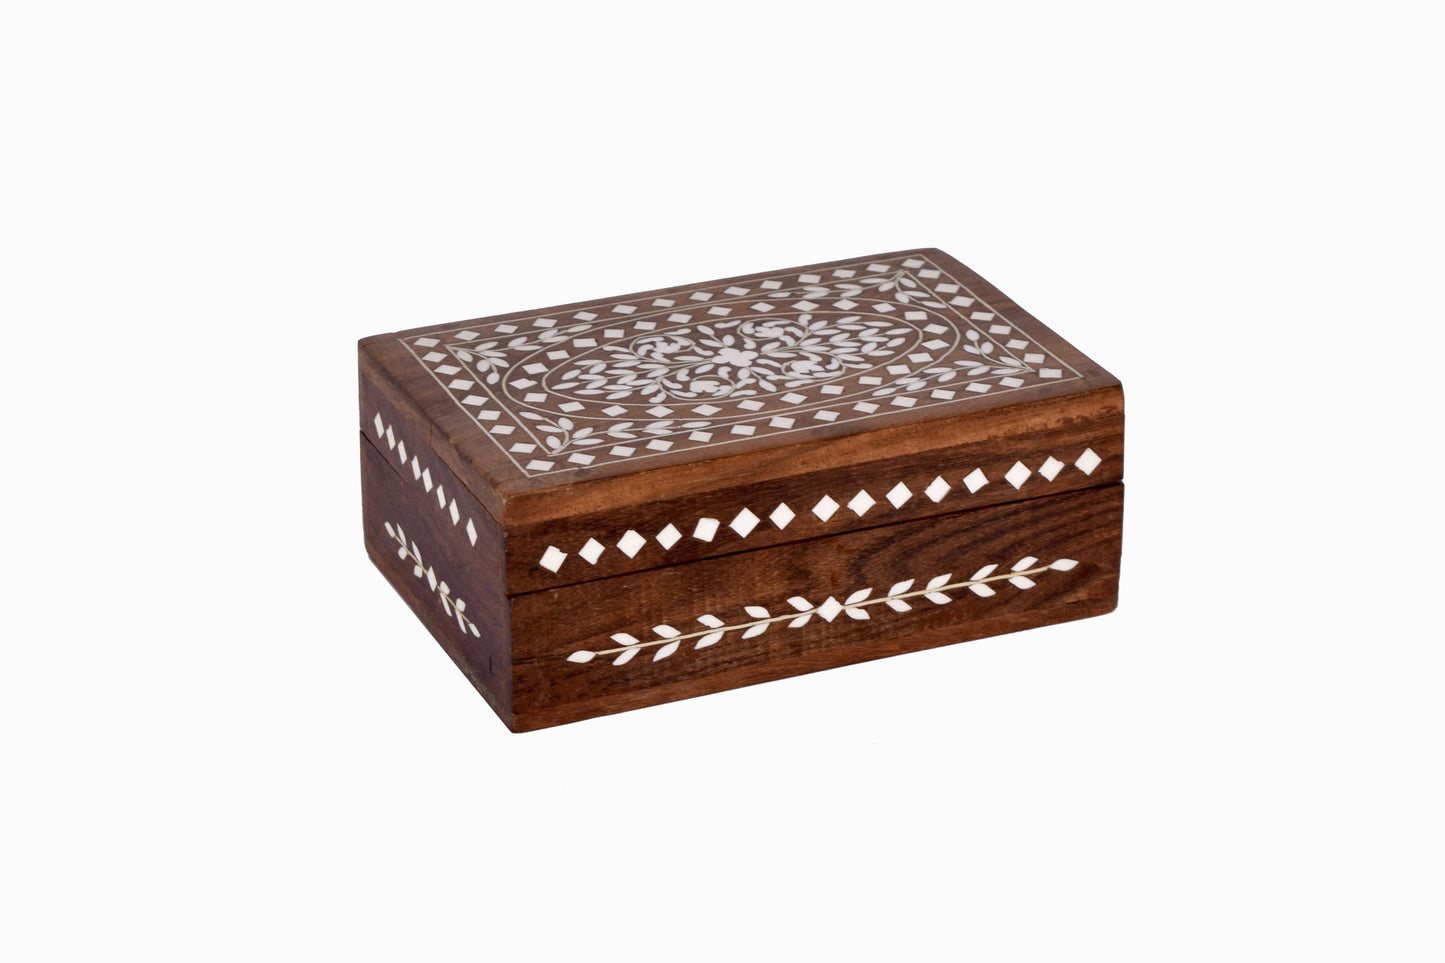 SMALL WOODEN BOX WITH BONE INLAY